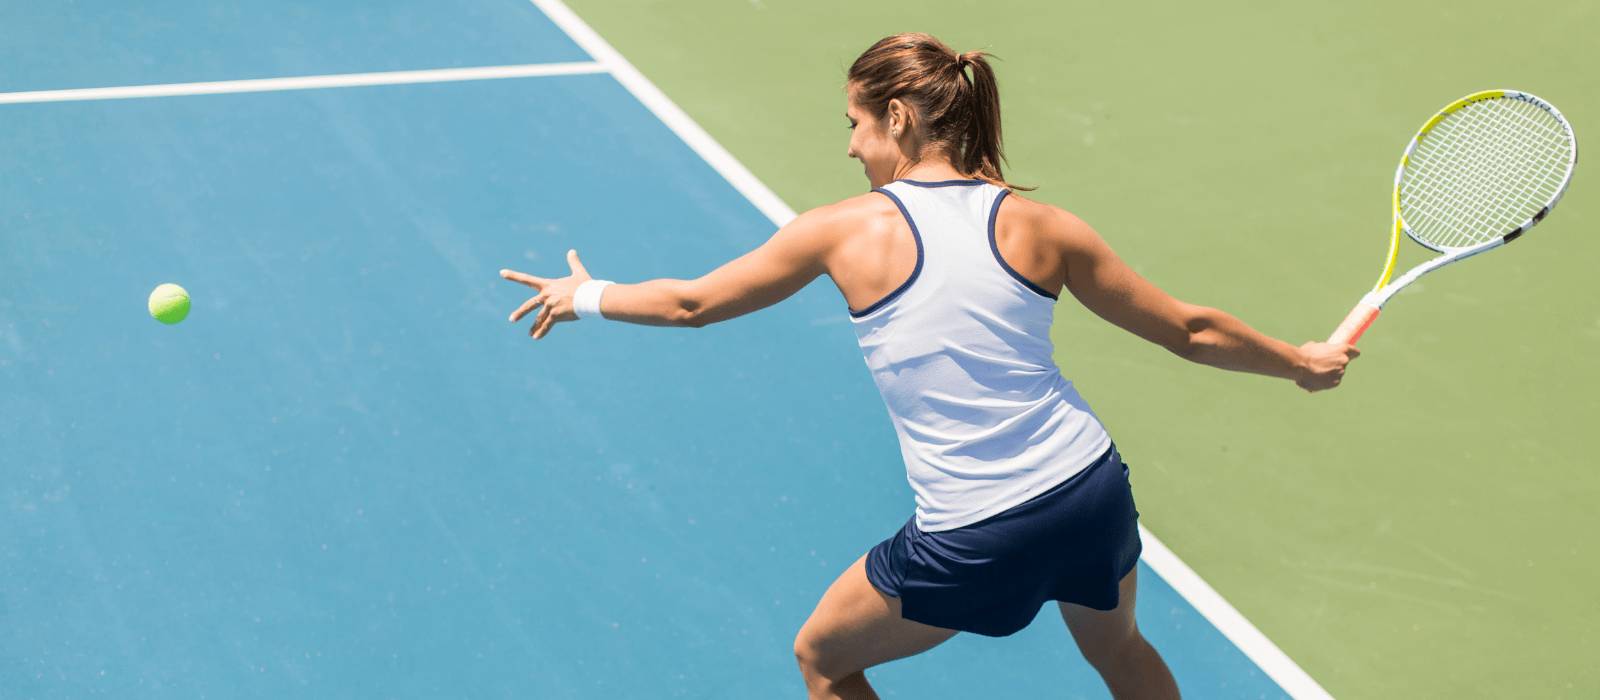 U Perform Tennis - female tennis player mid swing as a tennis ball comes towards her over a blue tennis court